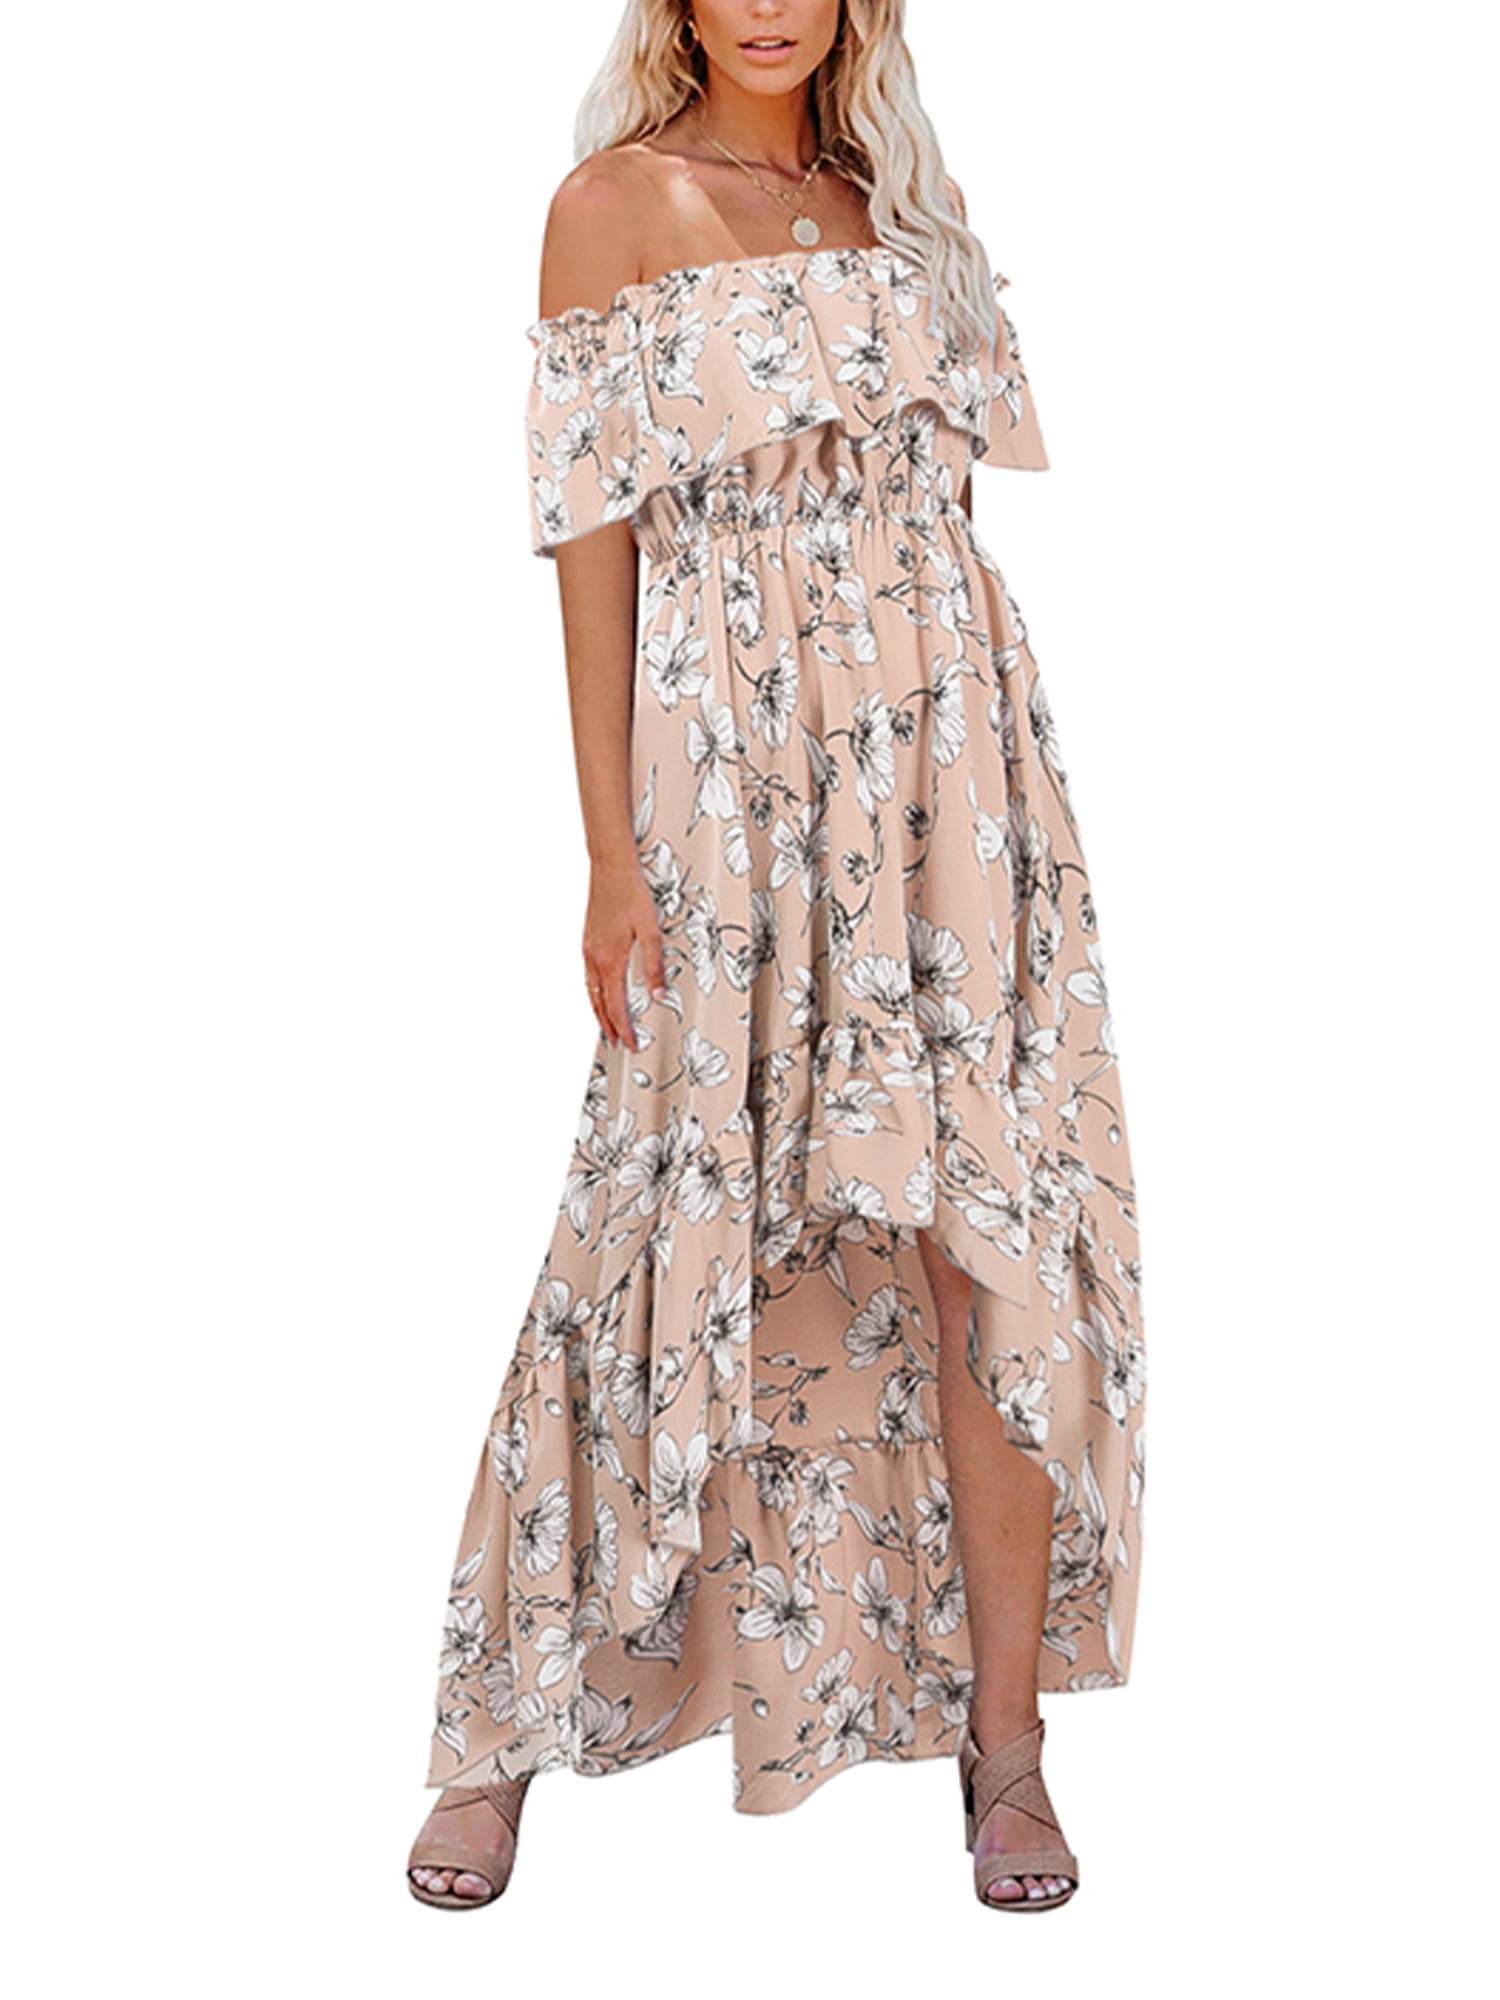 NEW Womens Boho Holiday Off Shoulder Floral Maxi Ladies Summer Beach Party Dress